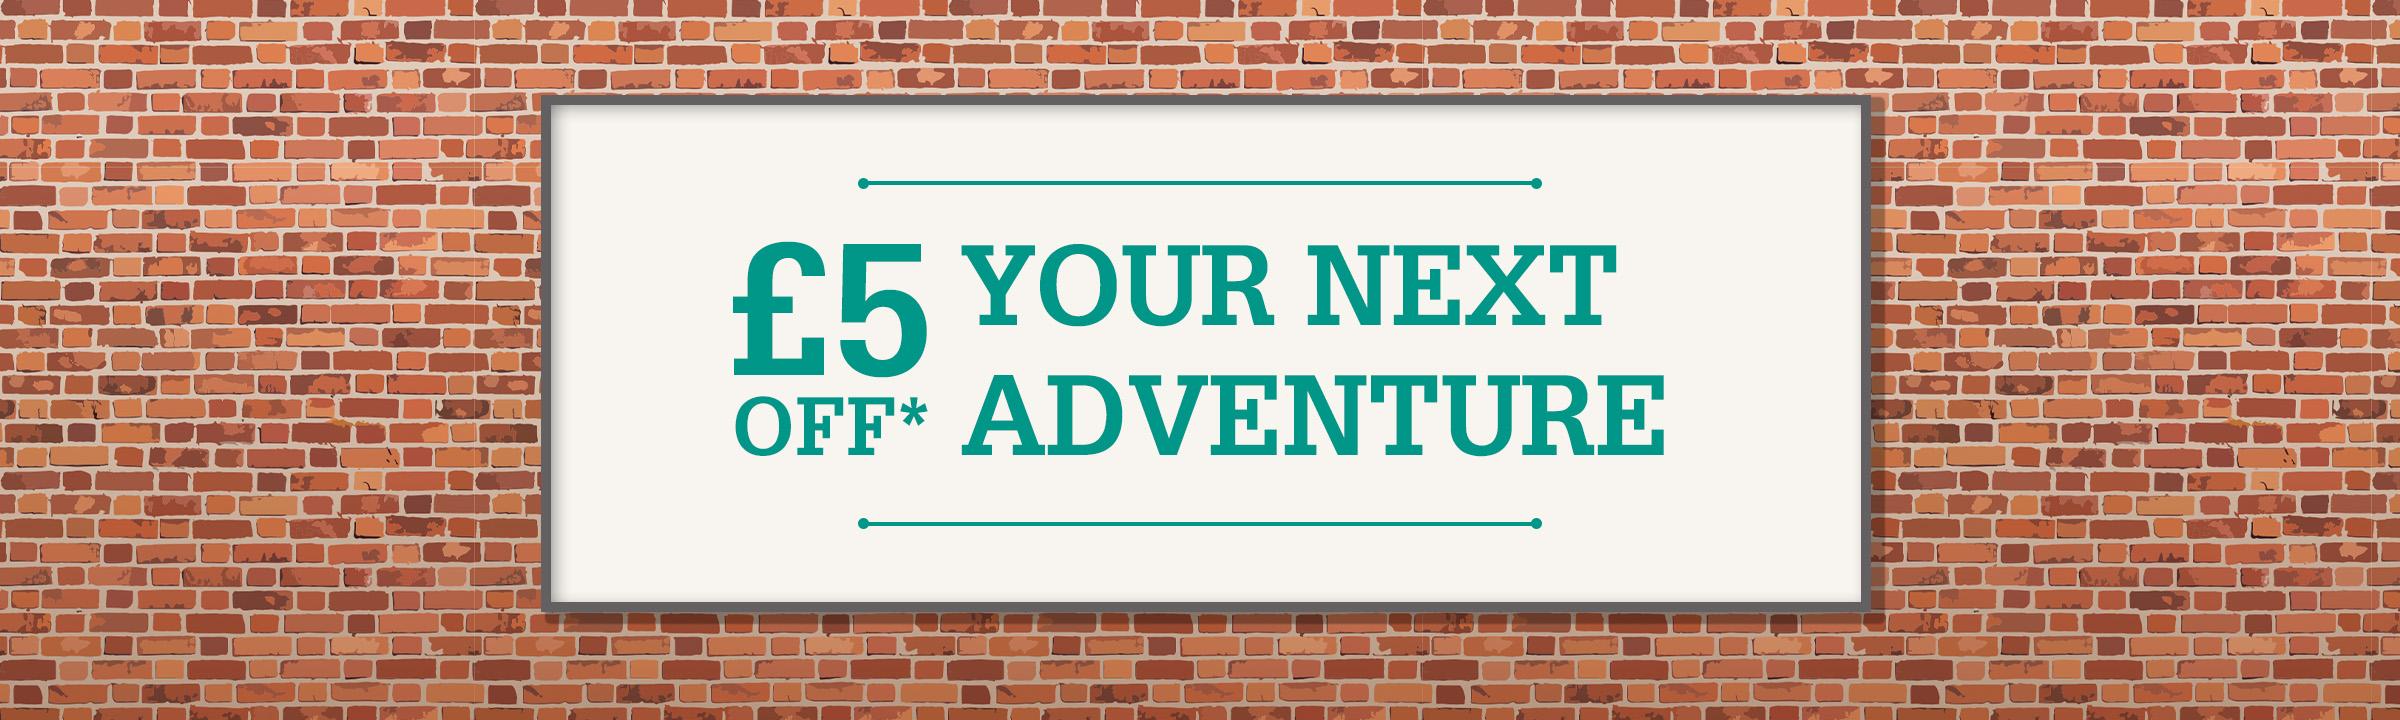 Image of text which says £5 off your next adventure